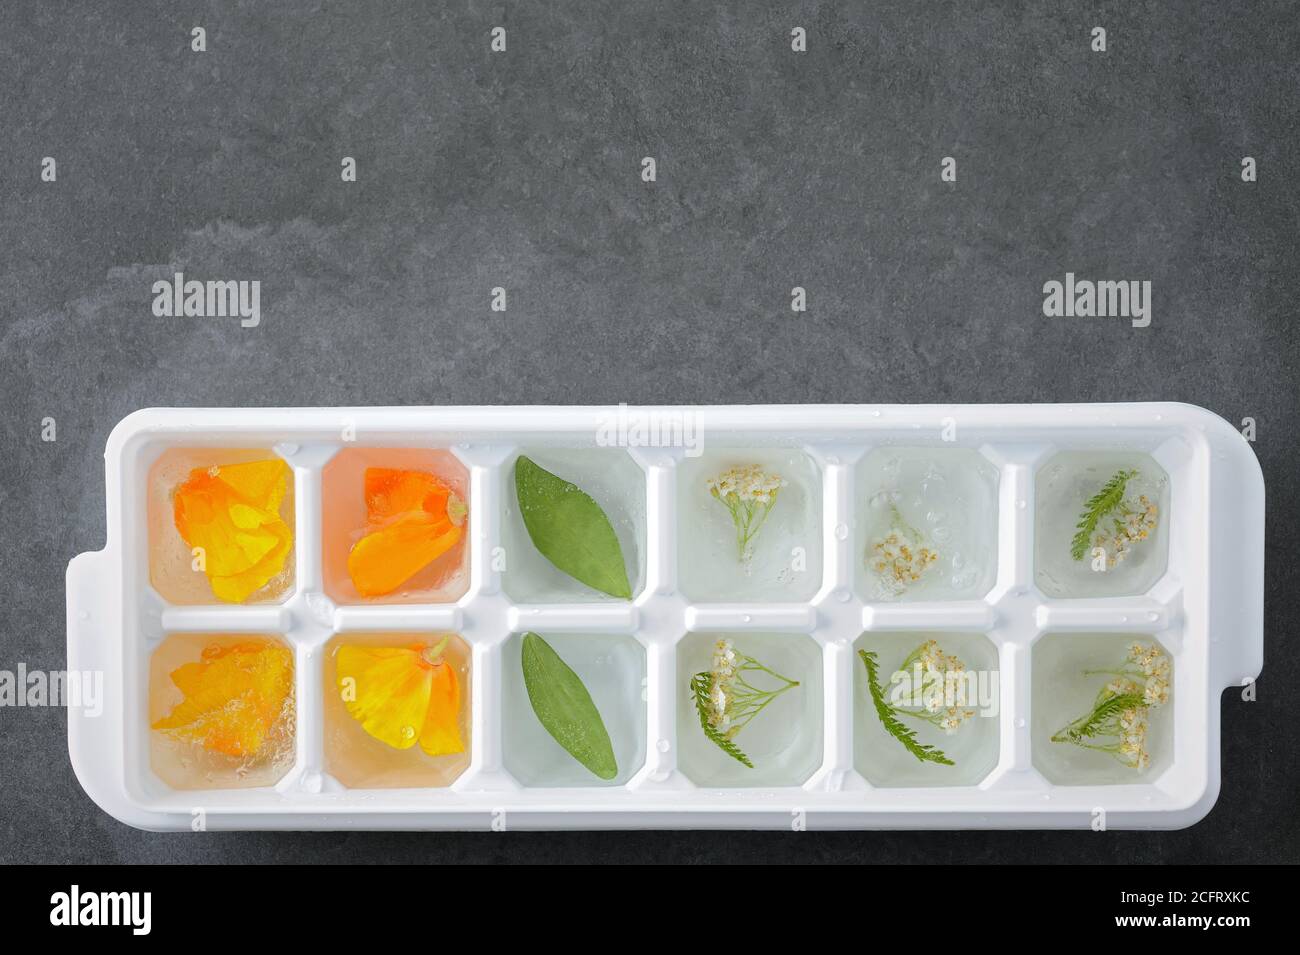 https://c8.alamy.com/comp/2CFRXKC/floral-ice-flowers-and-herbs-in-ice-mold-with-water-preparation-for-freezing-2CFRXKC.jpg